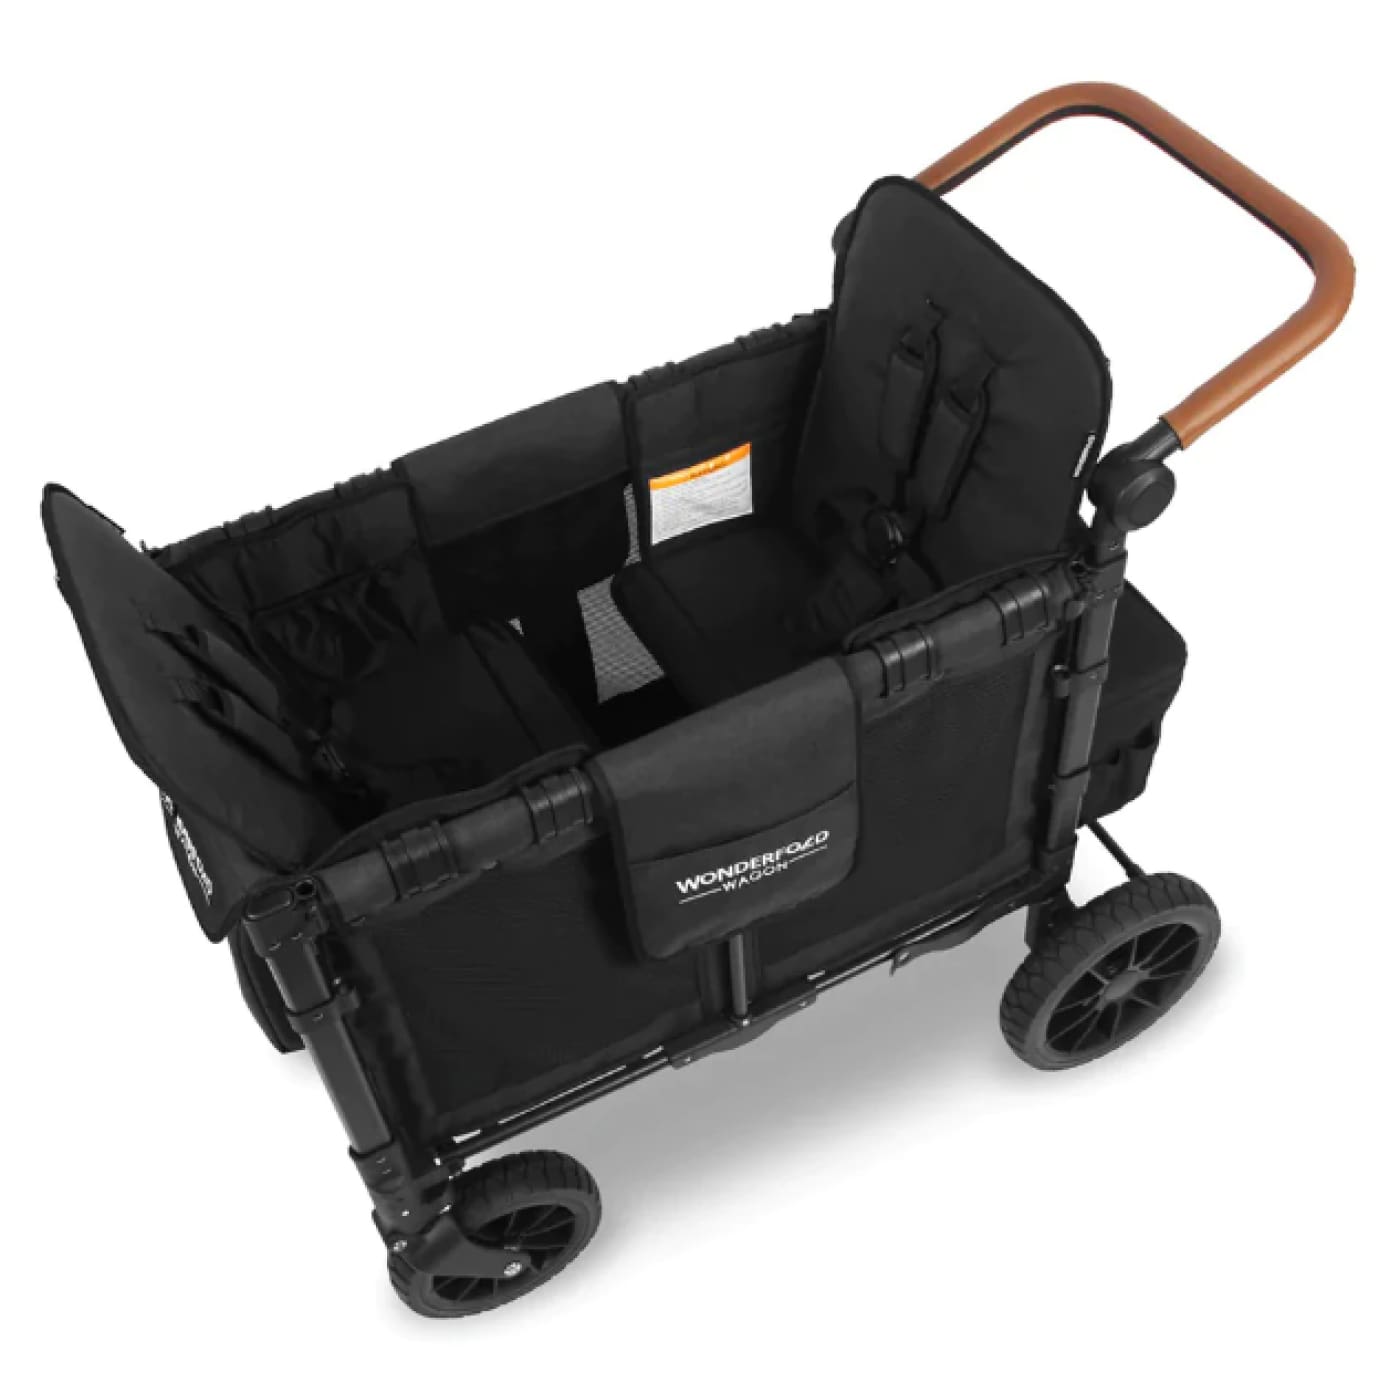 Wonderfold W2 Luxe Double Wagon - Volcanic Black - PRAMS & STROLLERS - WAGONS